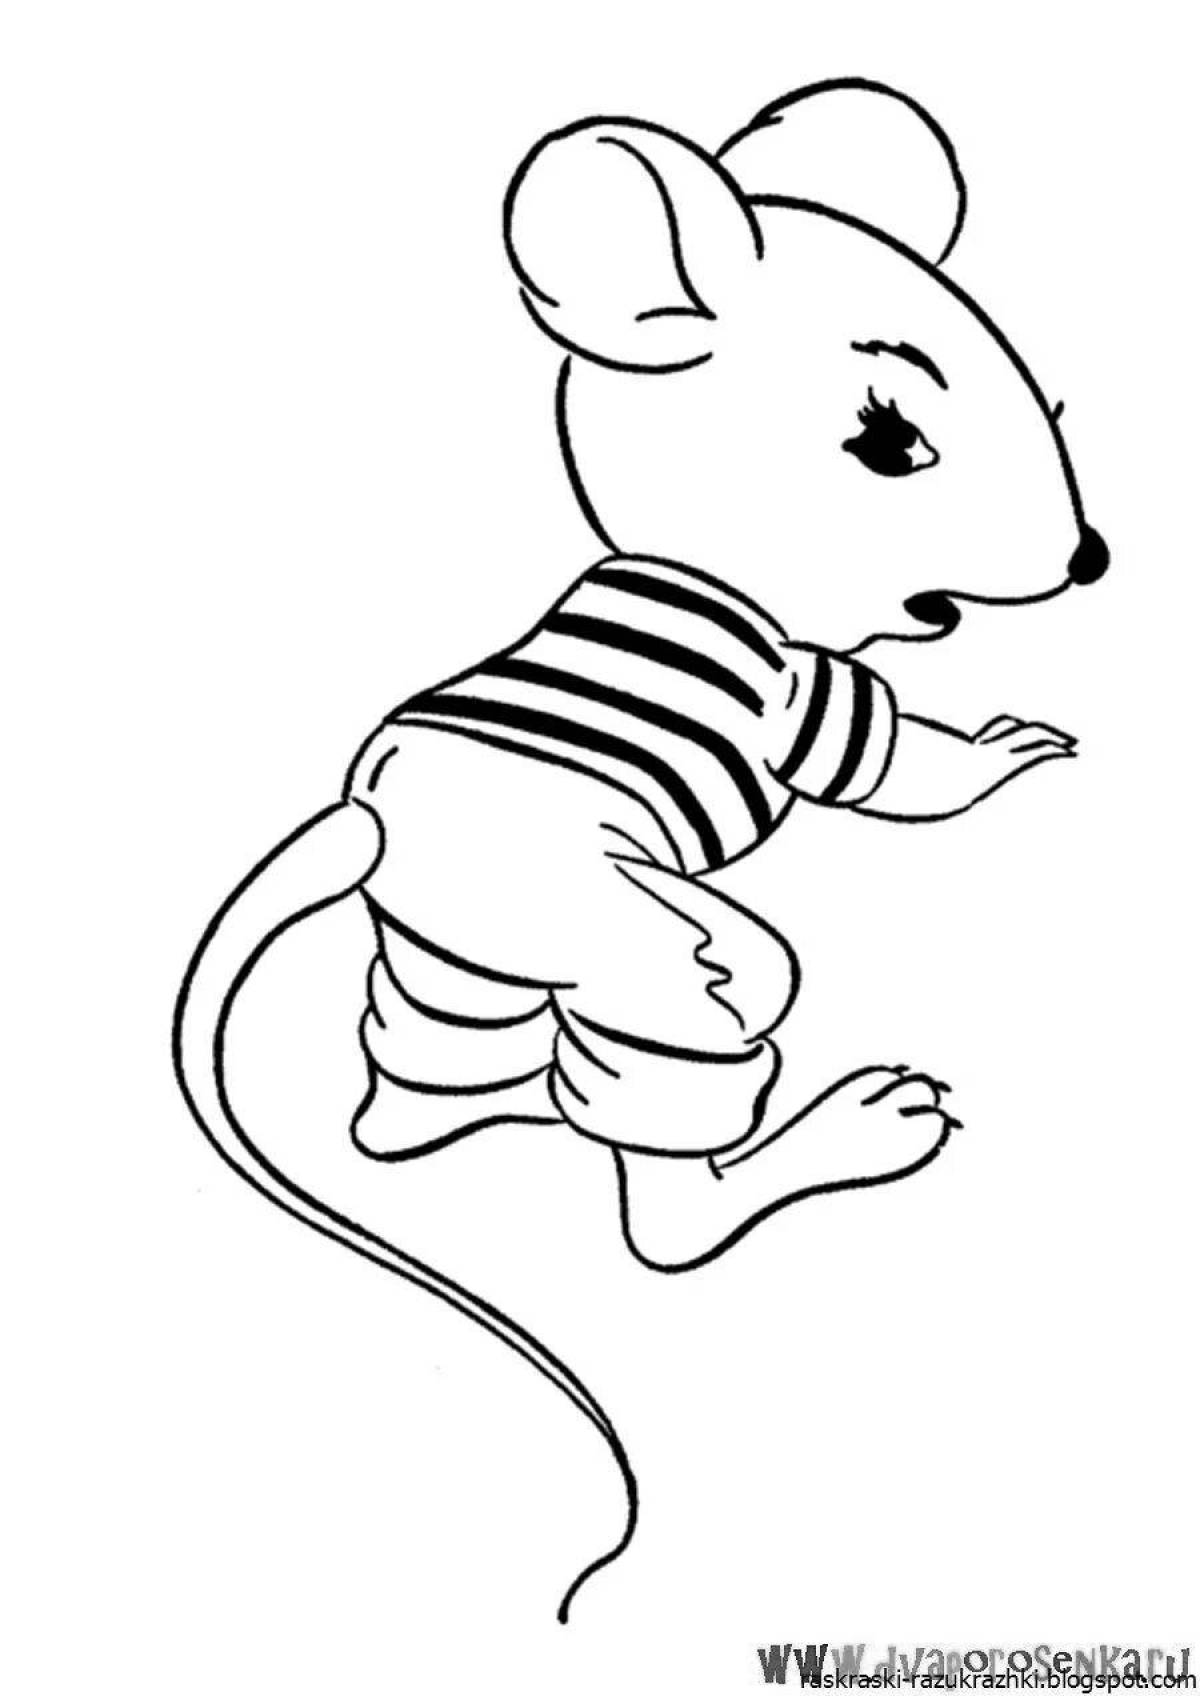 Fun little mouse coloring